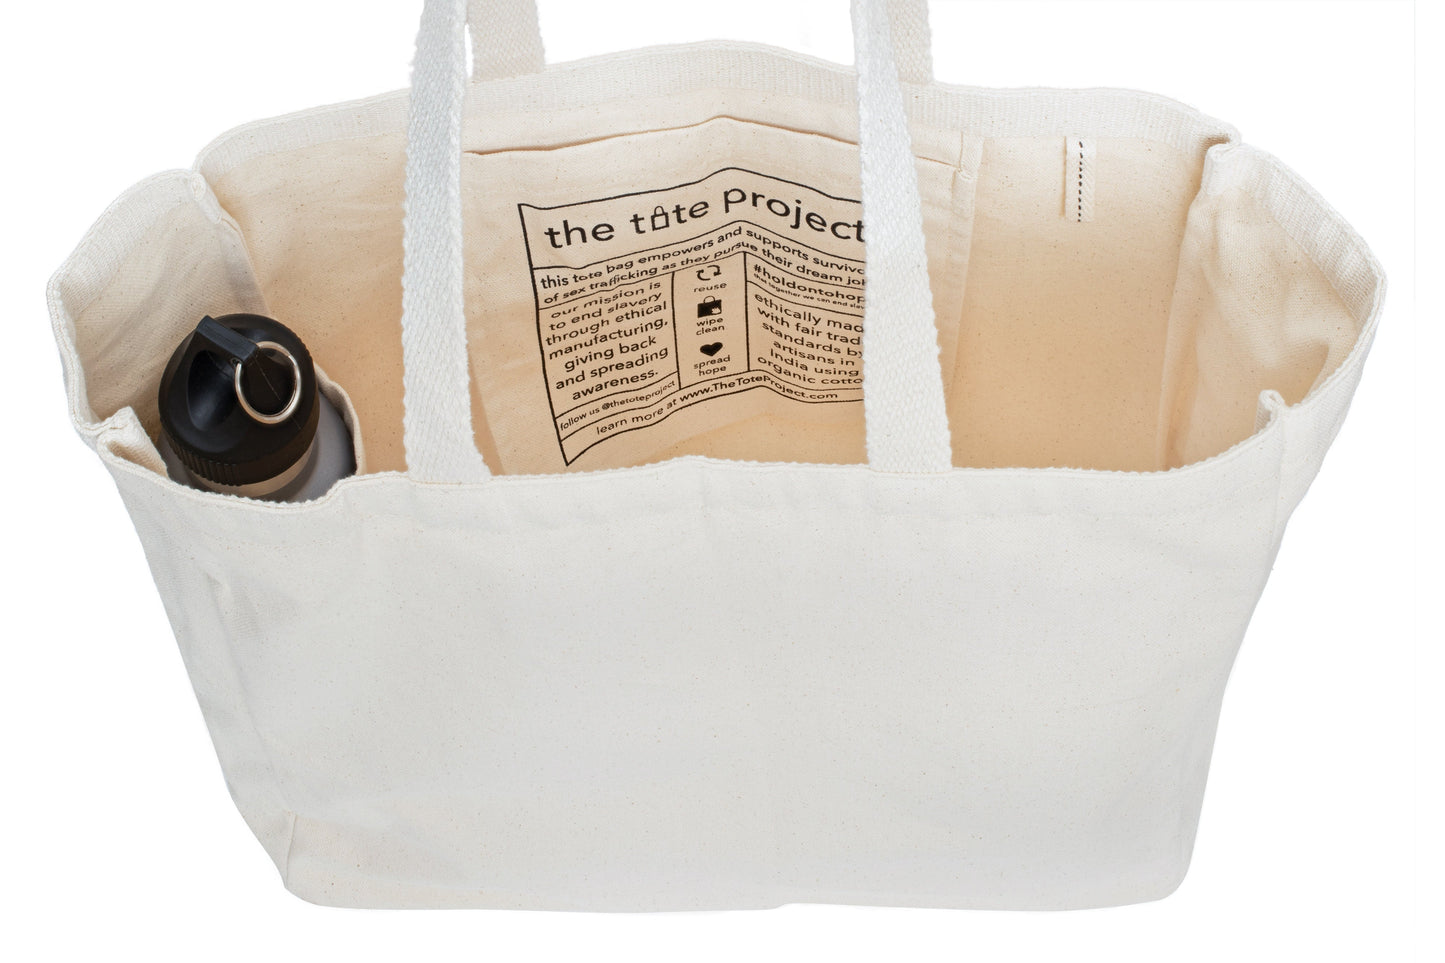 Hold on To Hope (Limited Edition) | Tote